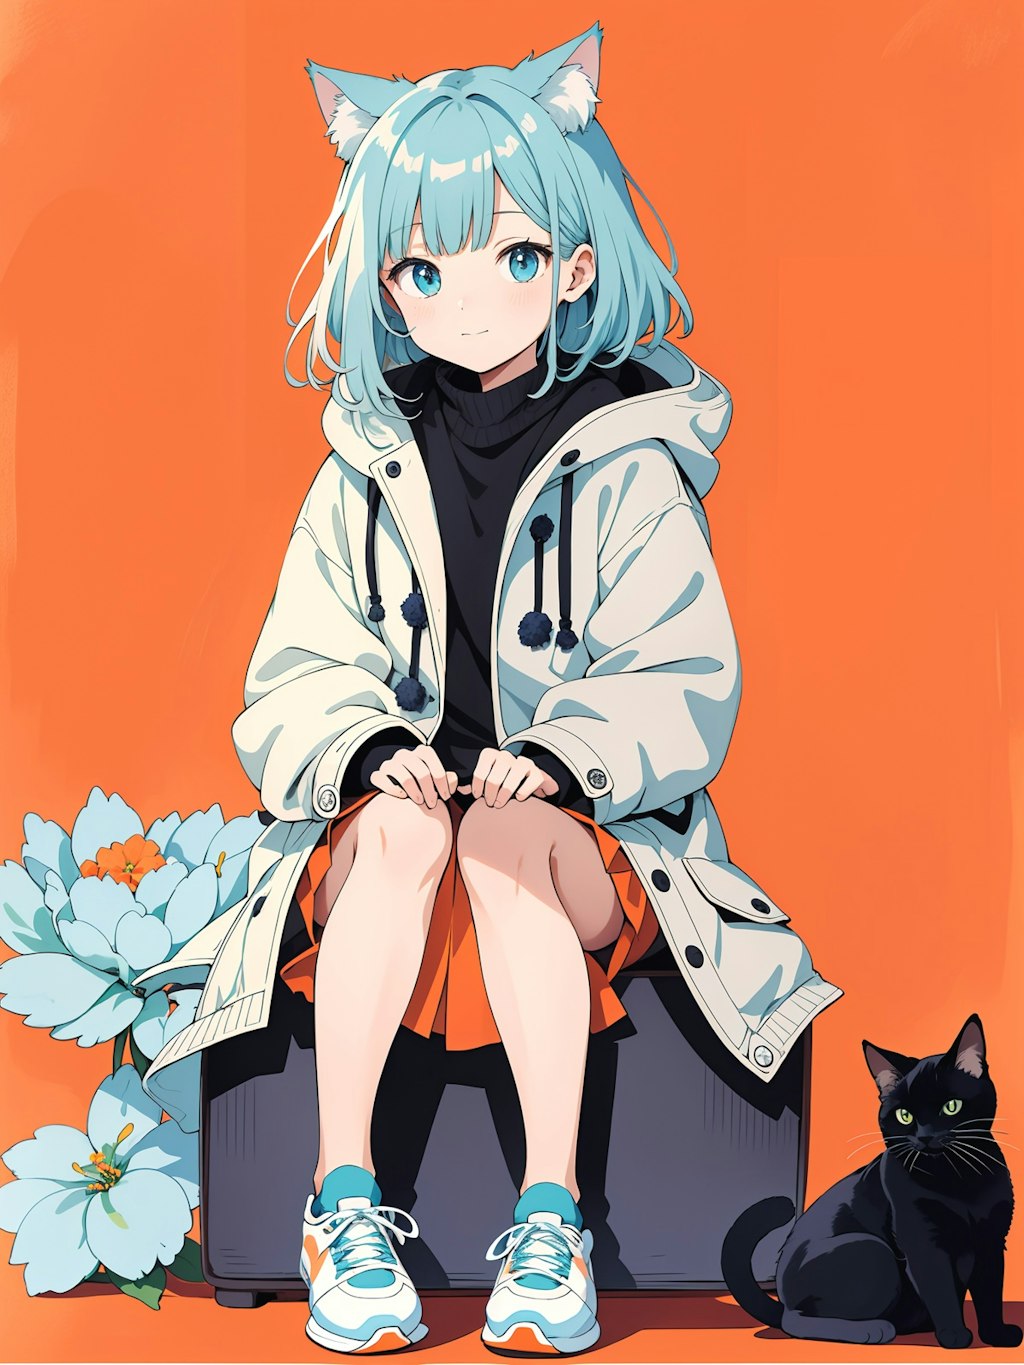 cat and girl